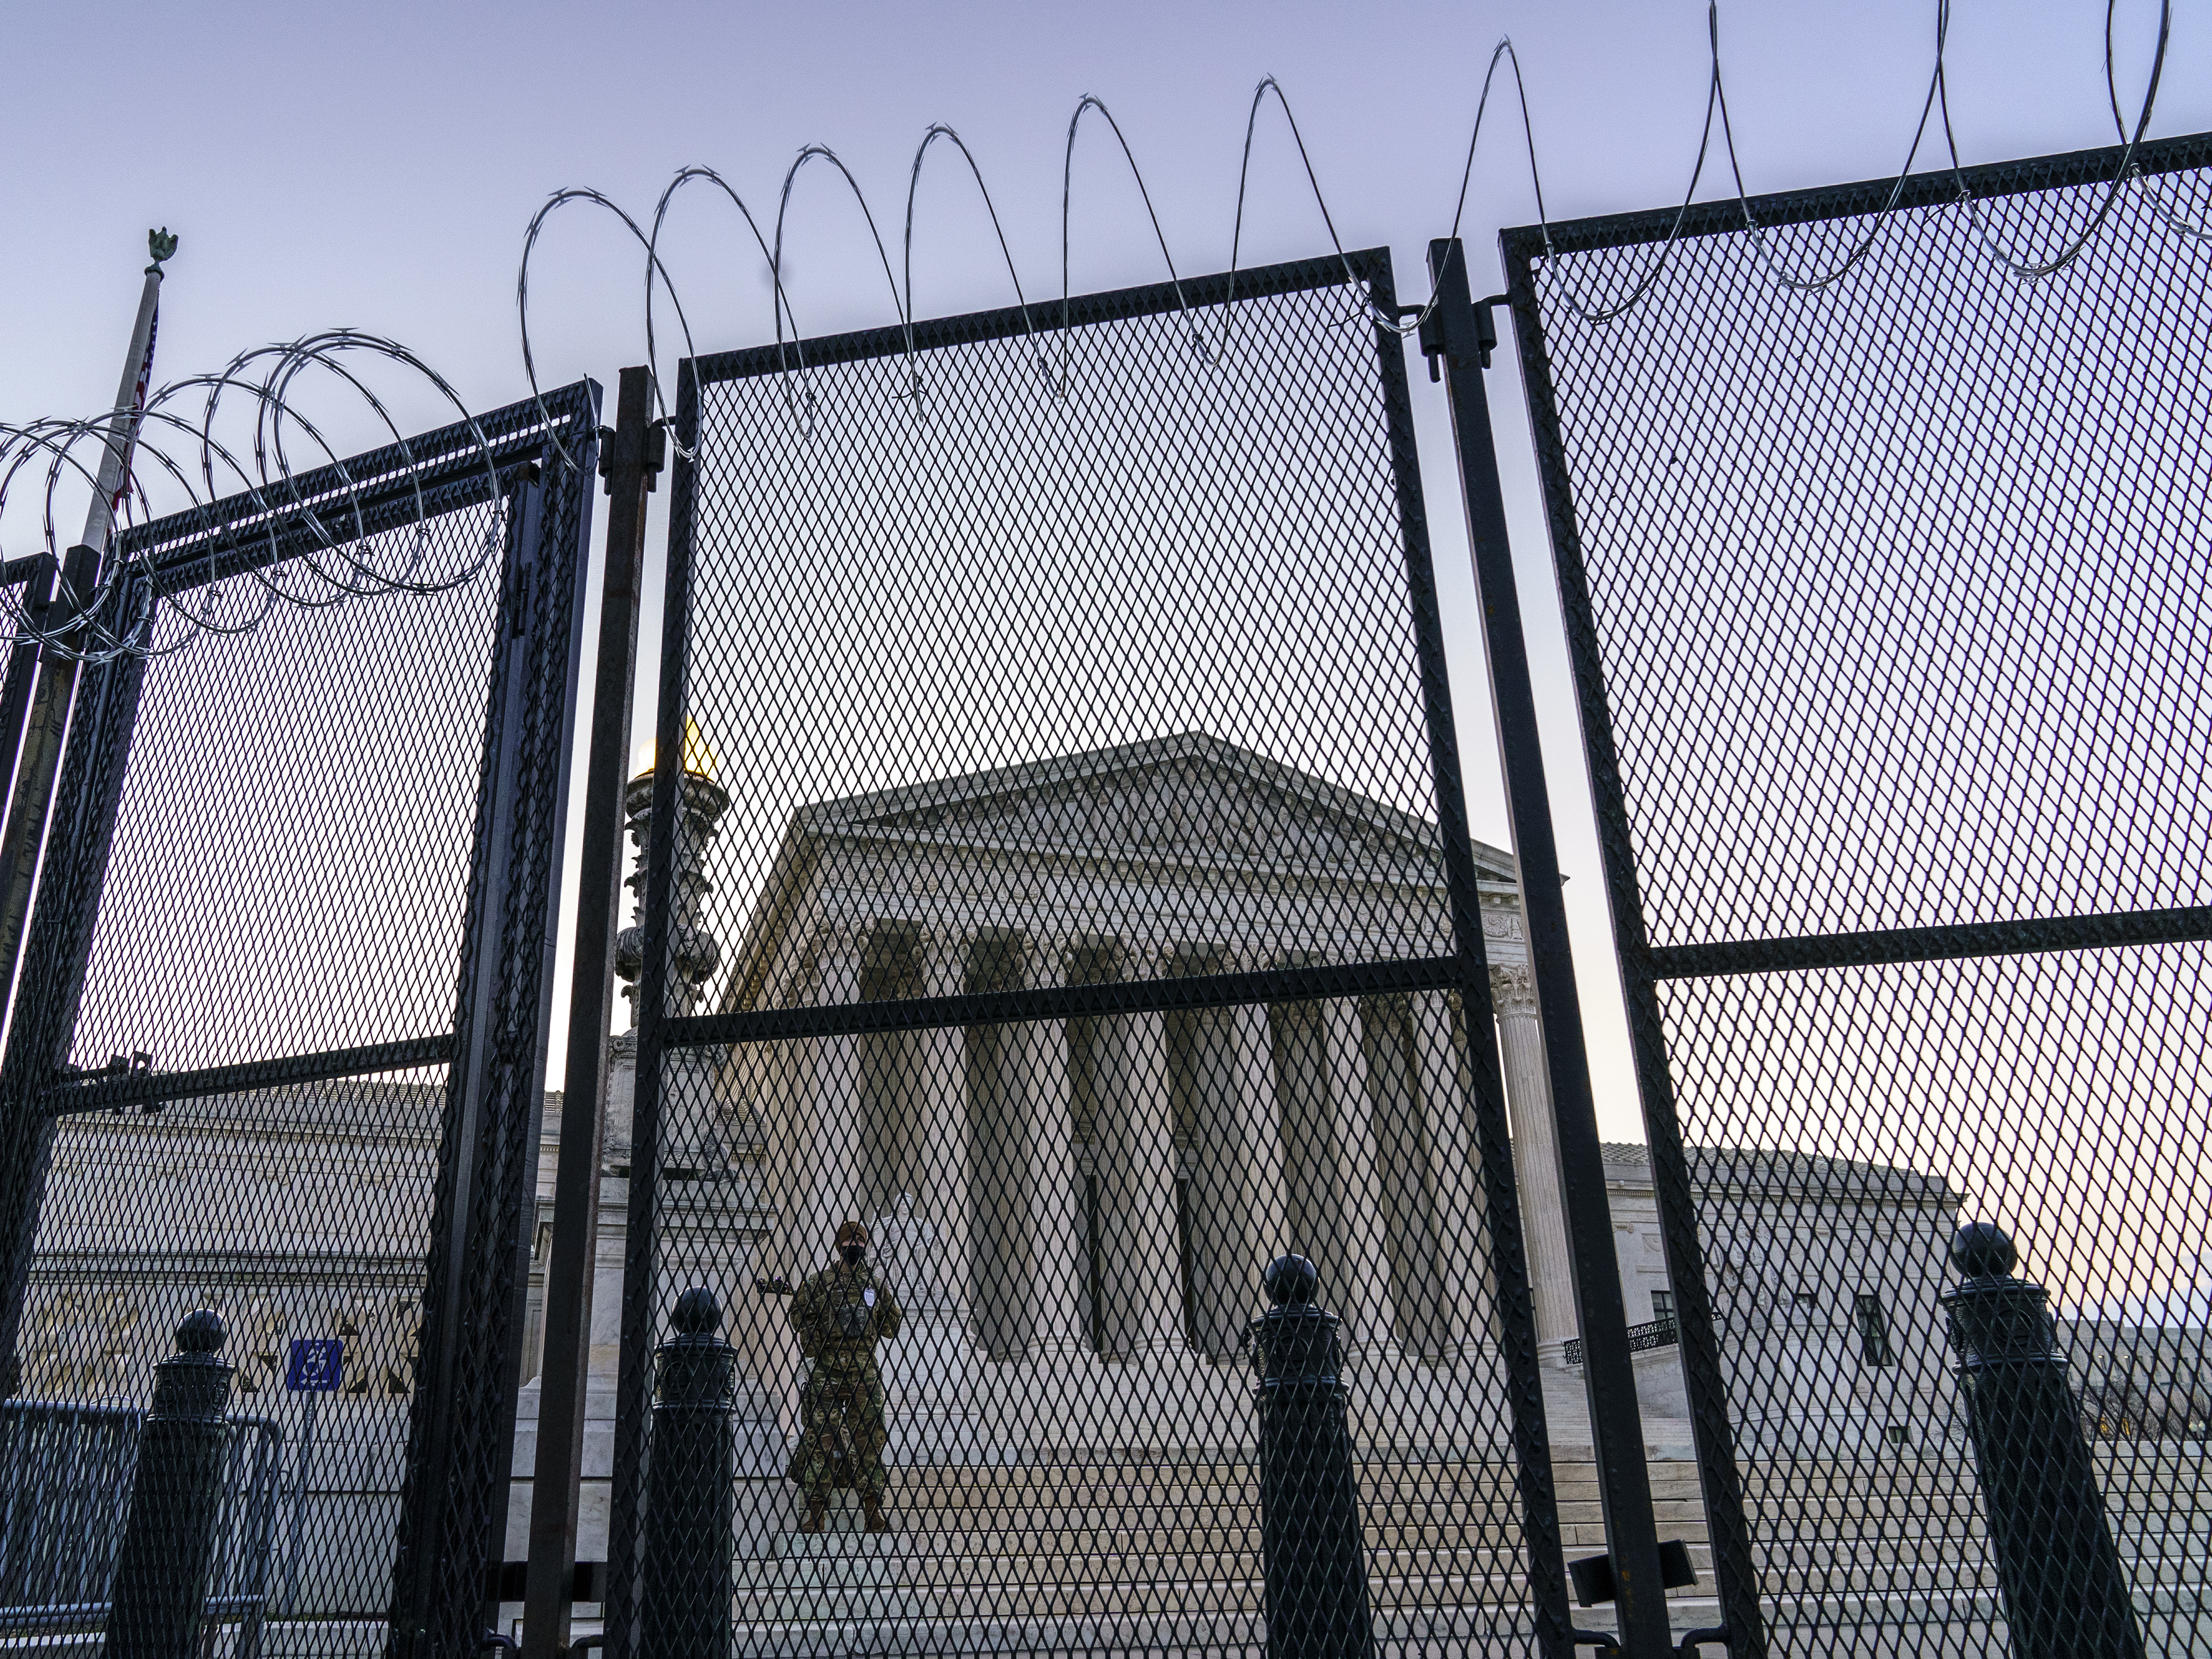 National Guard troops keep watch Thursday, March 4, 2021 at the Supreme Court. J. Scott Applewhite/AP